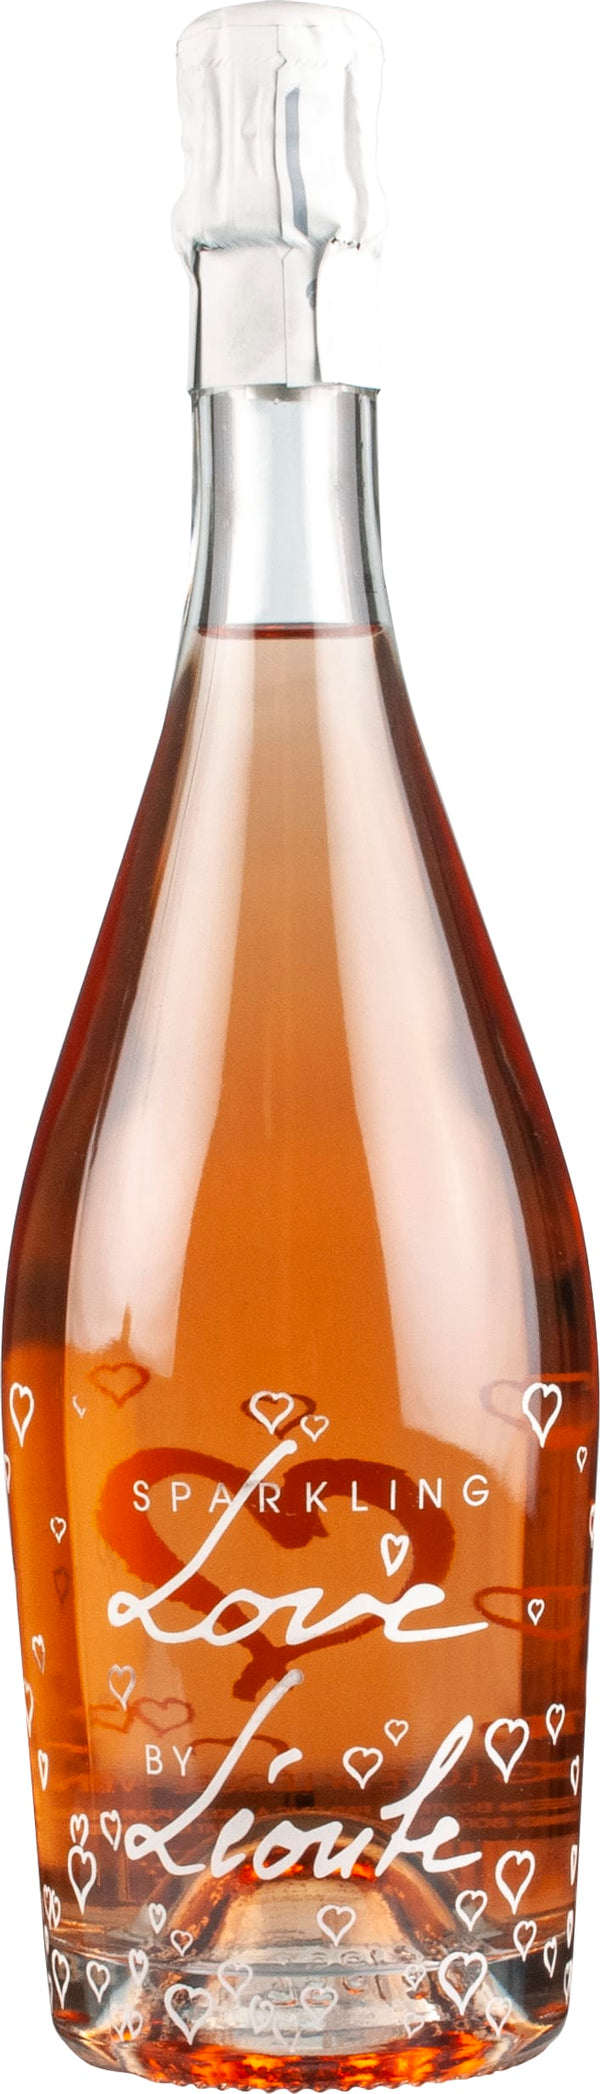 Chateau Leoube NV Sparkling Love by Leoube Organic Rose, Chateau NV6x75cl - Just Wines 